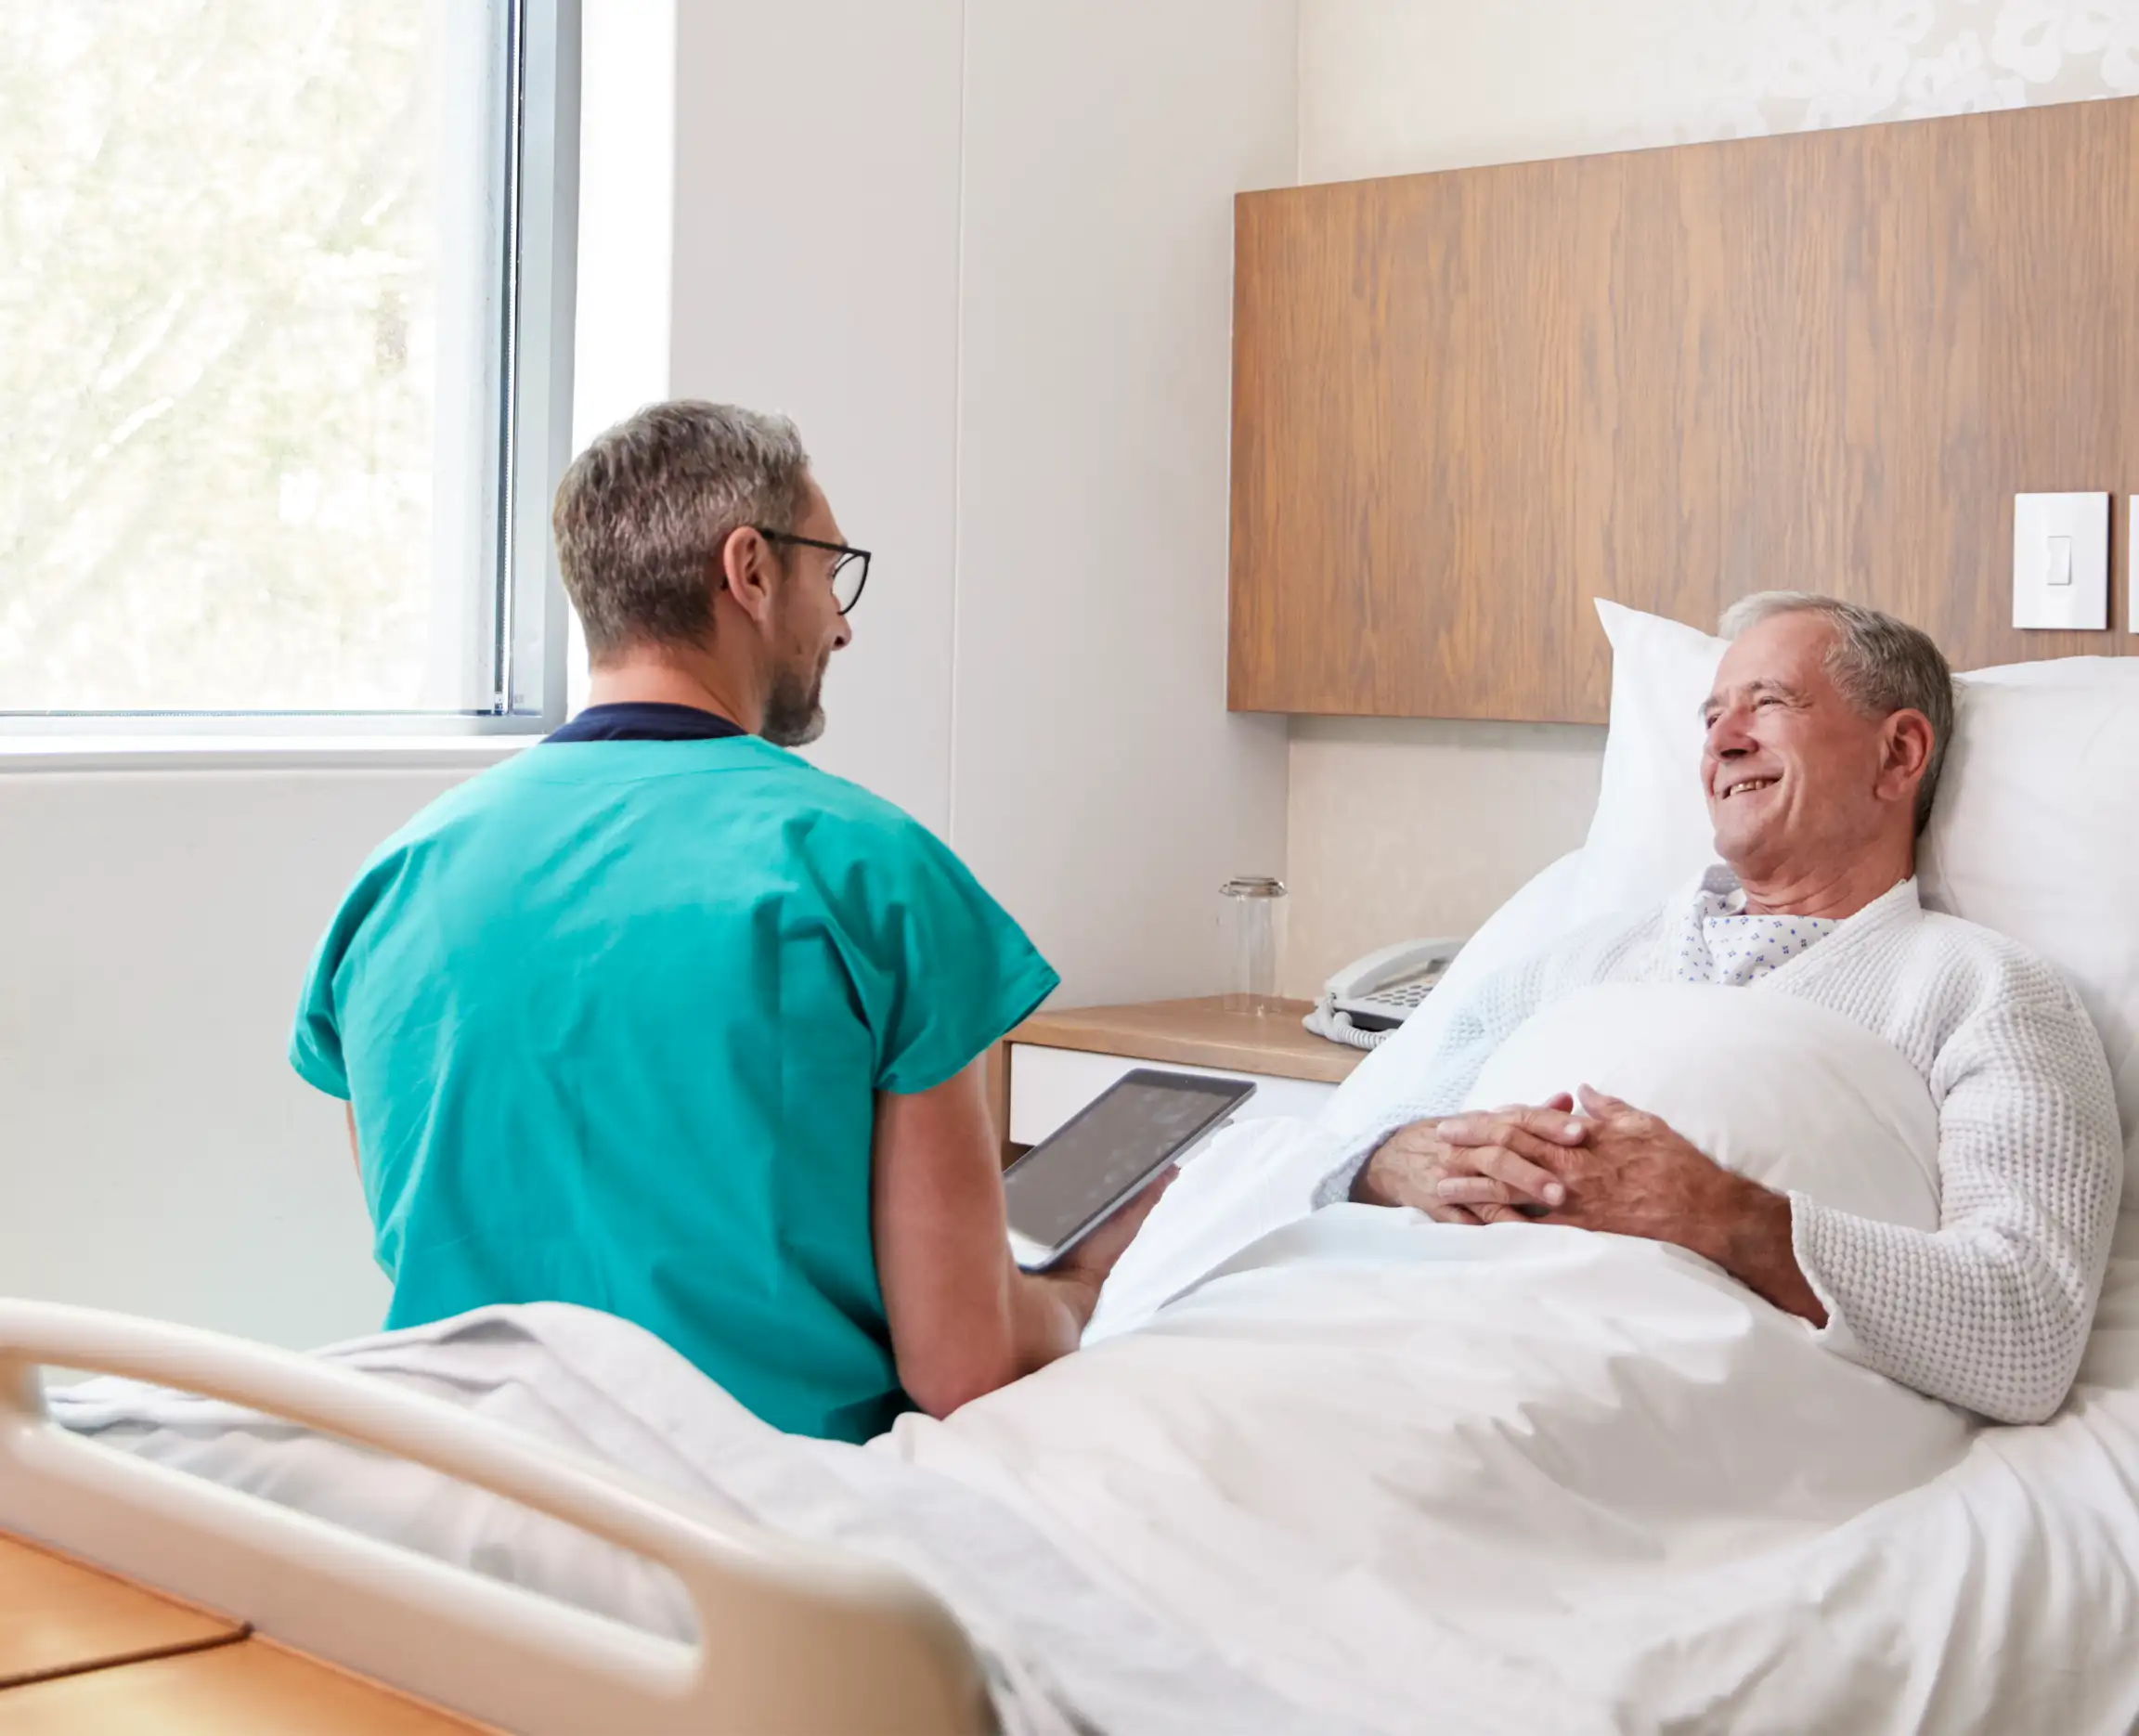 Doctor and patient have a bed side conversation.